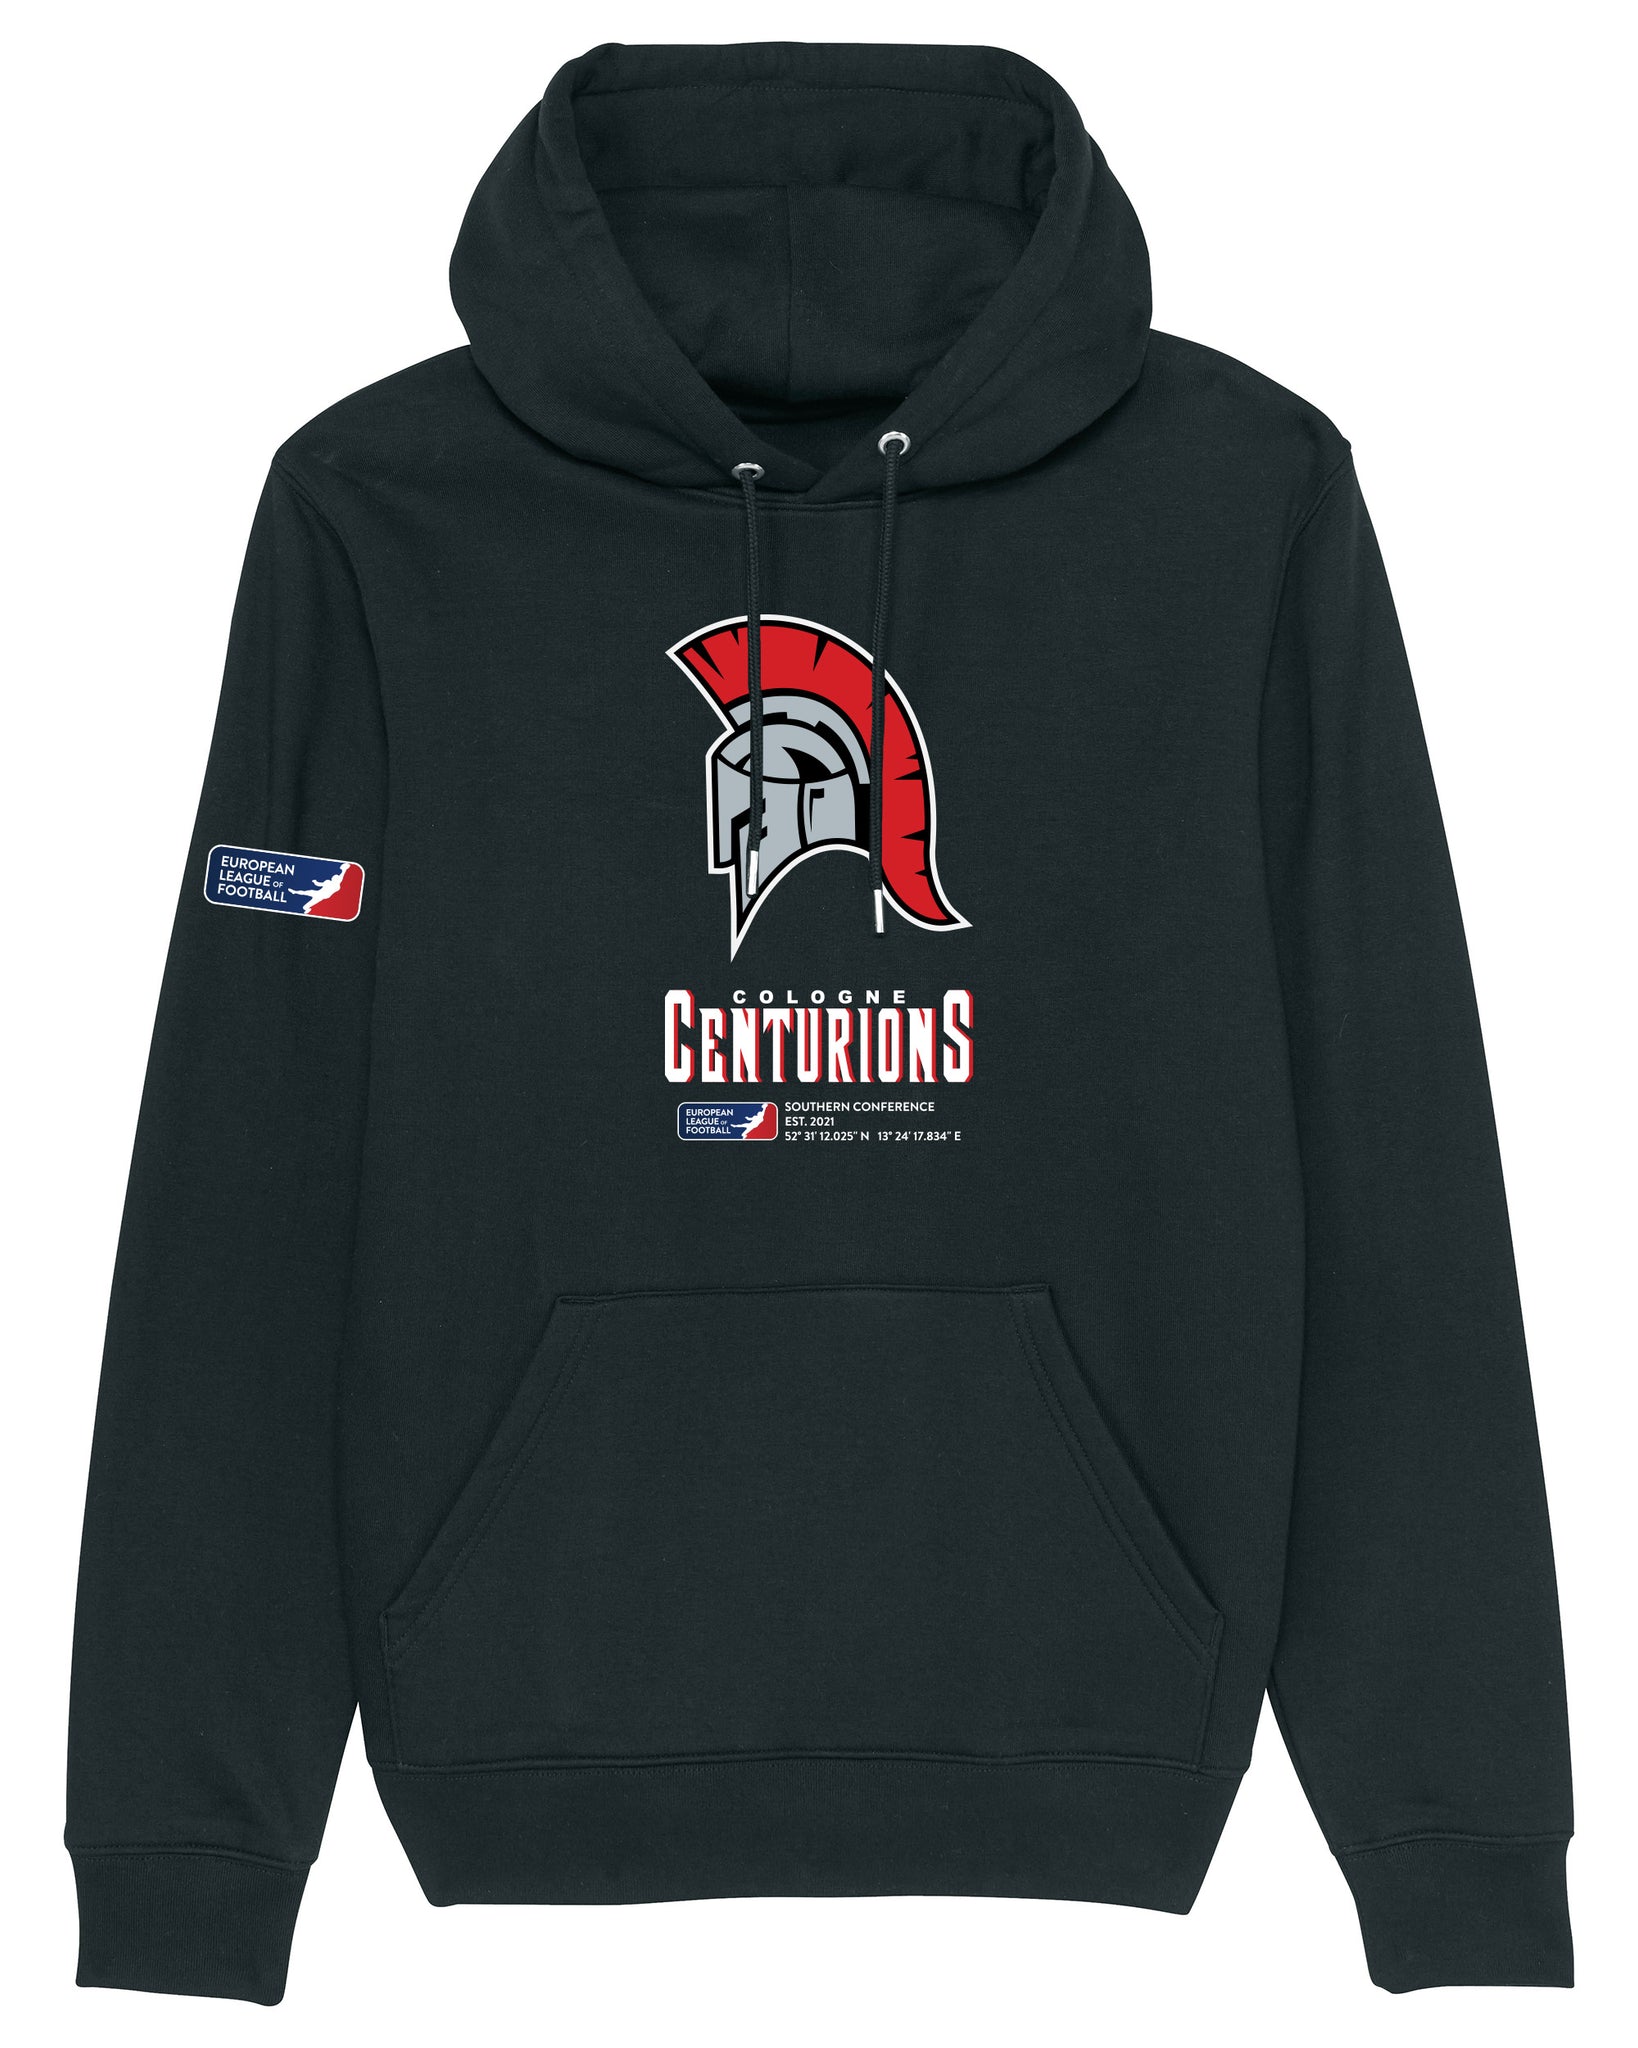 Cologne Centurions DNA Hoodie 2022